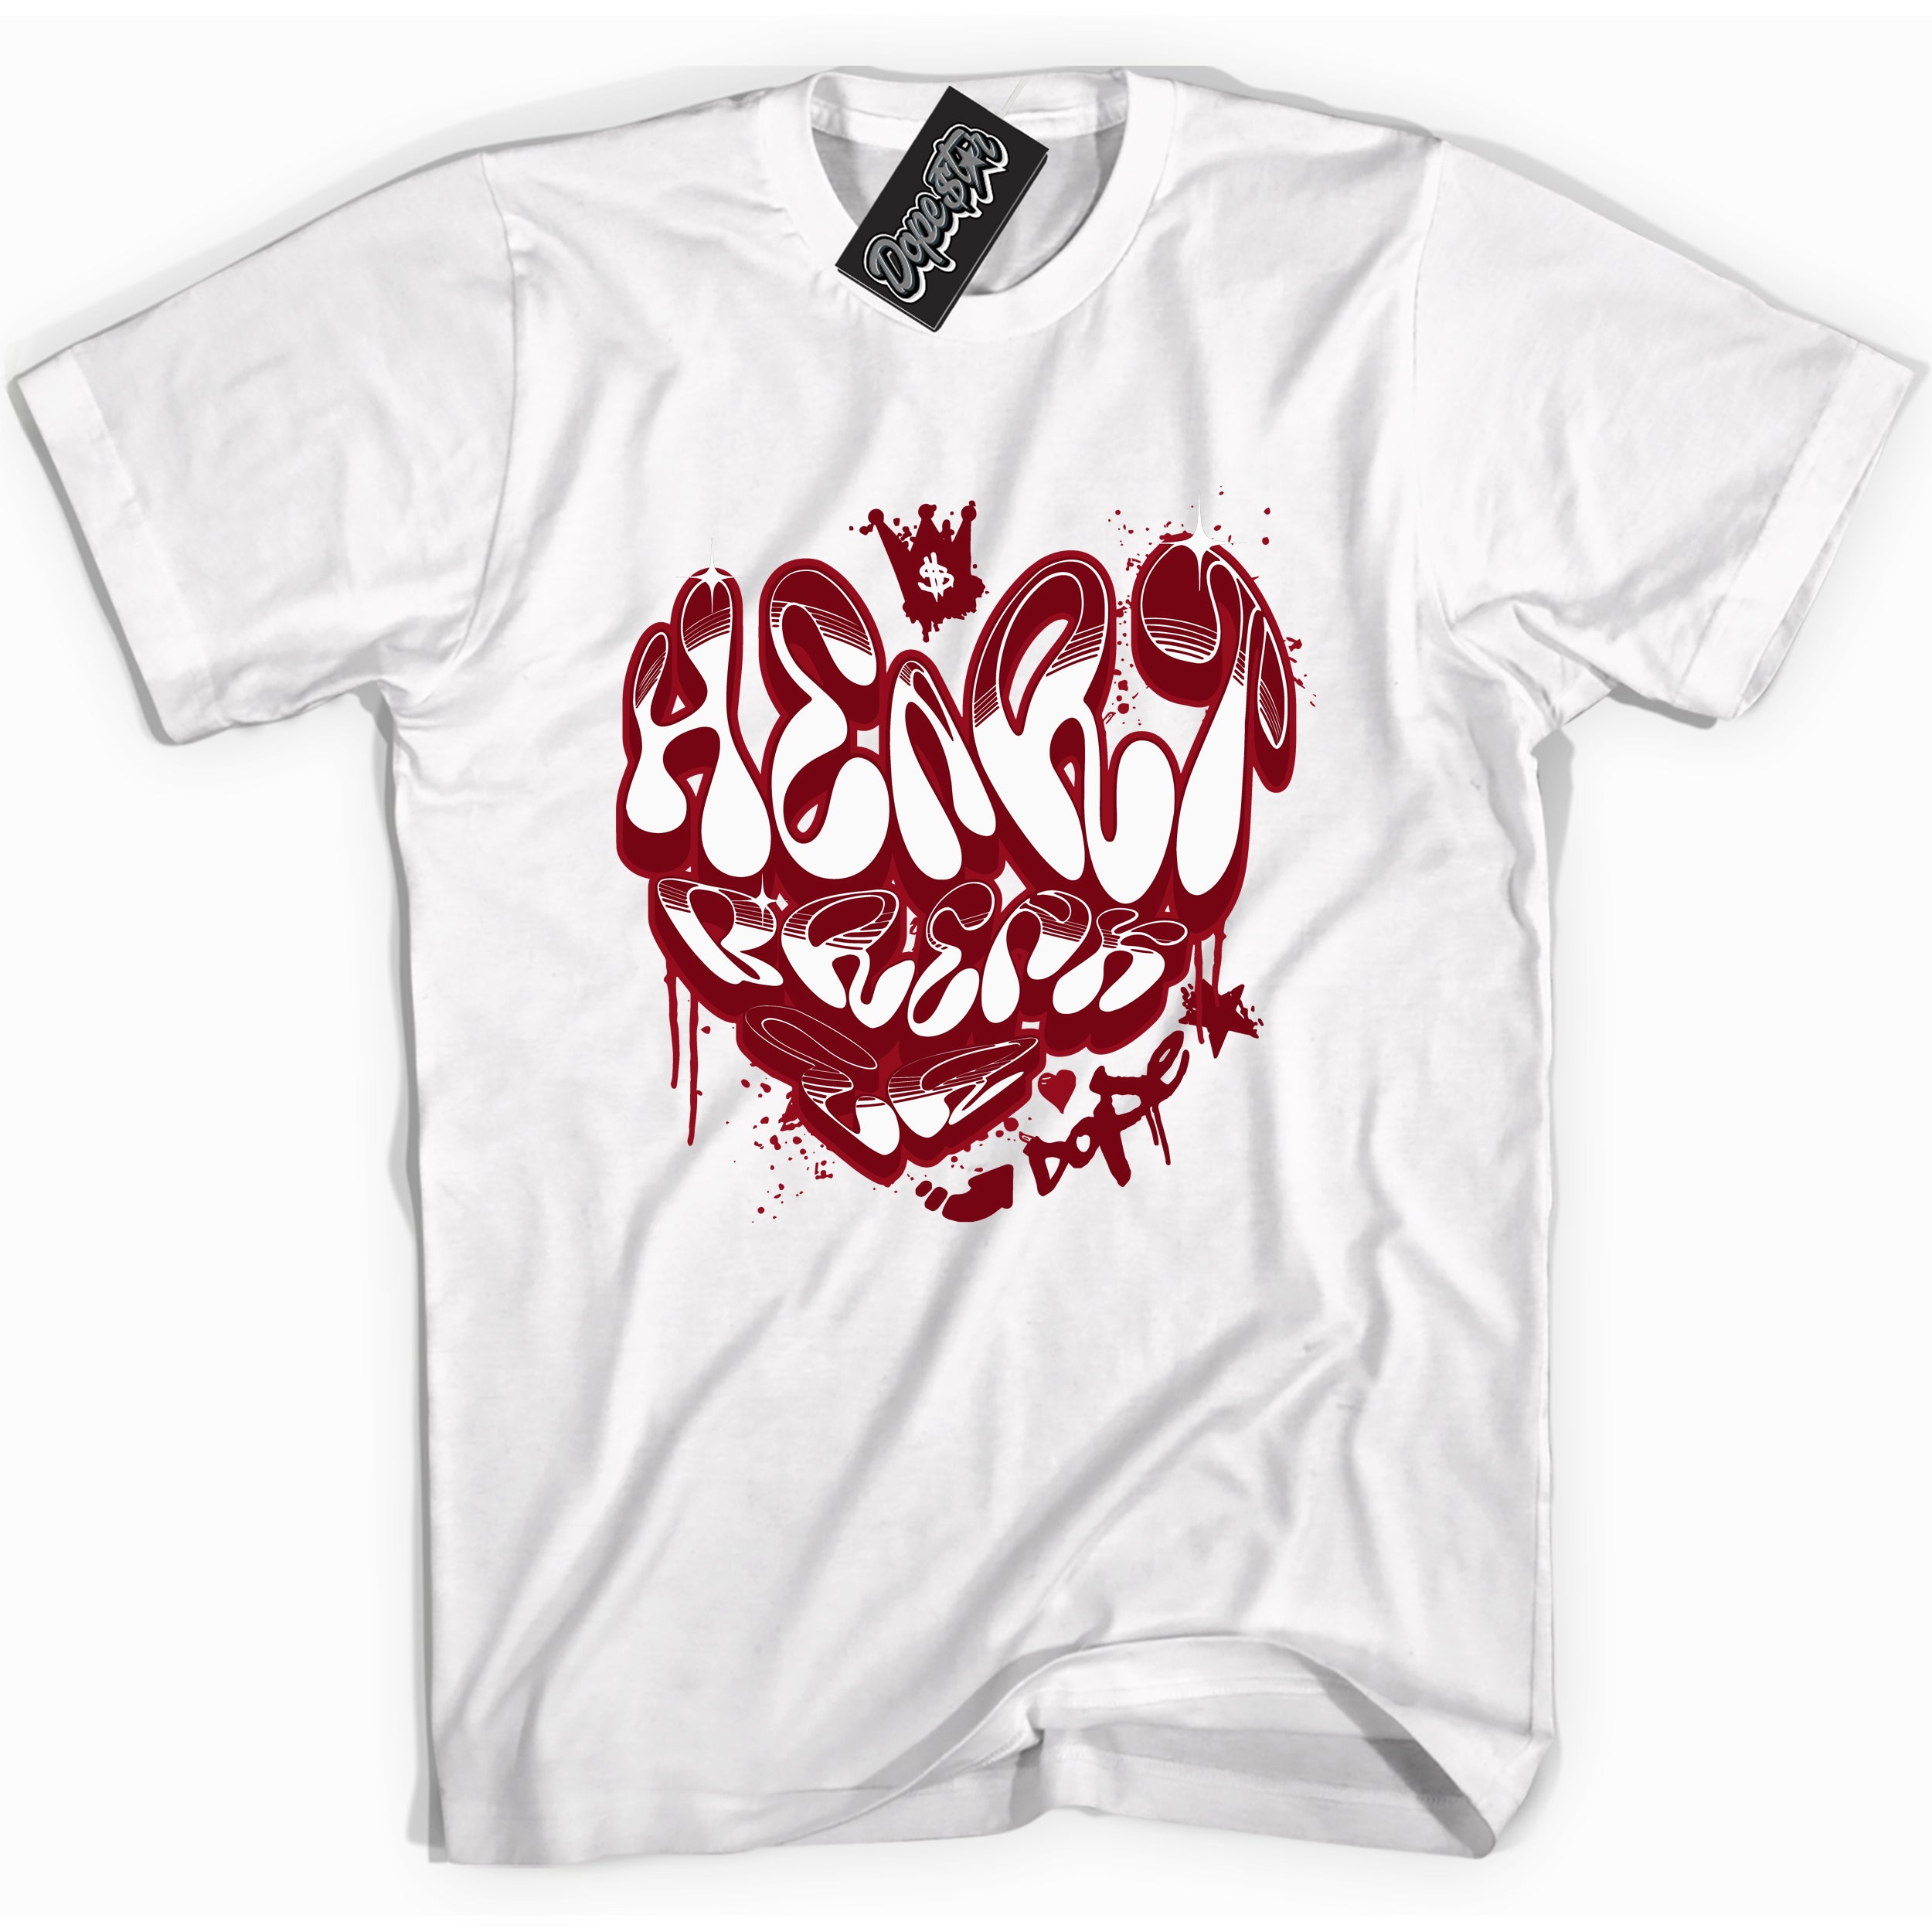 Cool White graphic tee with “ Heartbreaker Graffiti ” print, that perfectly matches OG Metallic Burgundy 1s sneakers 